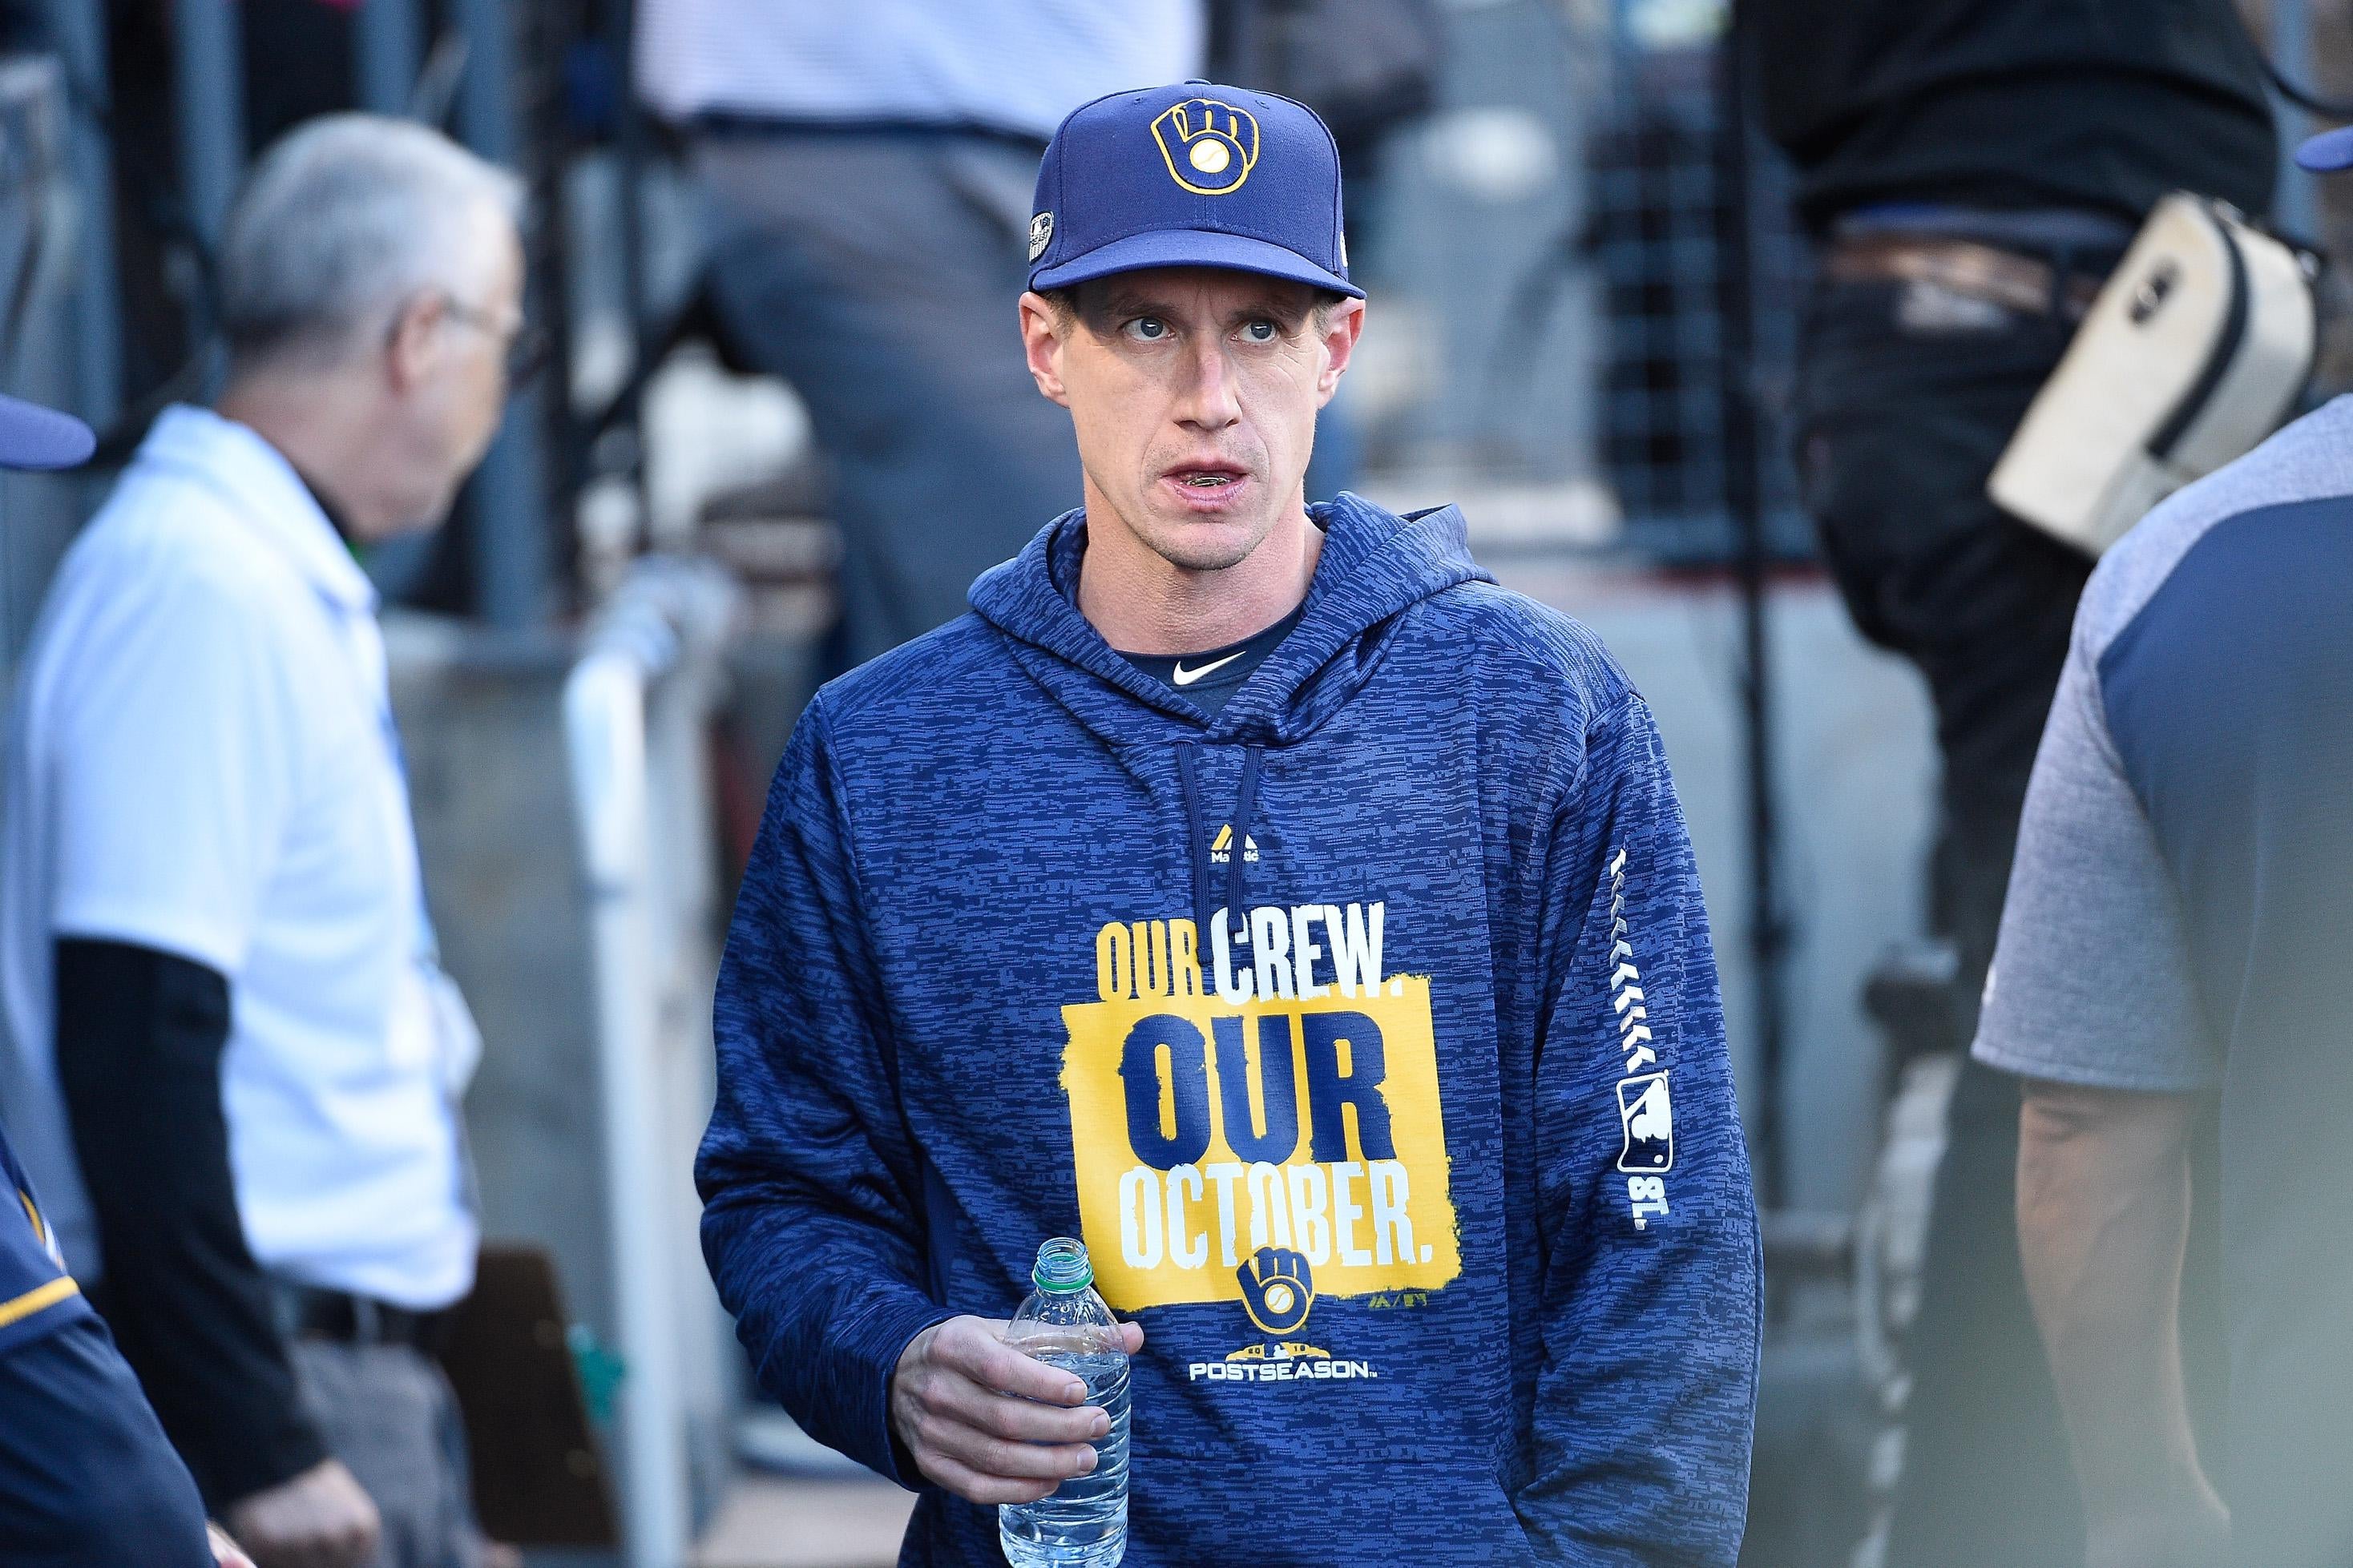 Brewers manager Craig Counsell in the dugout, holding a water bottle.